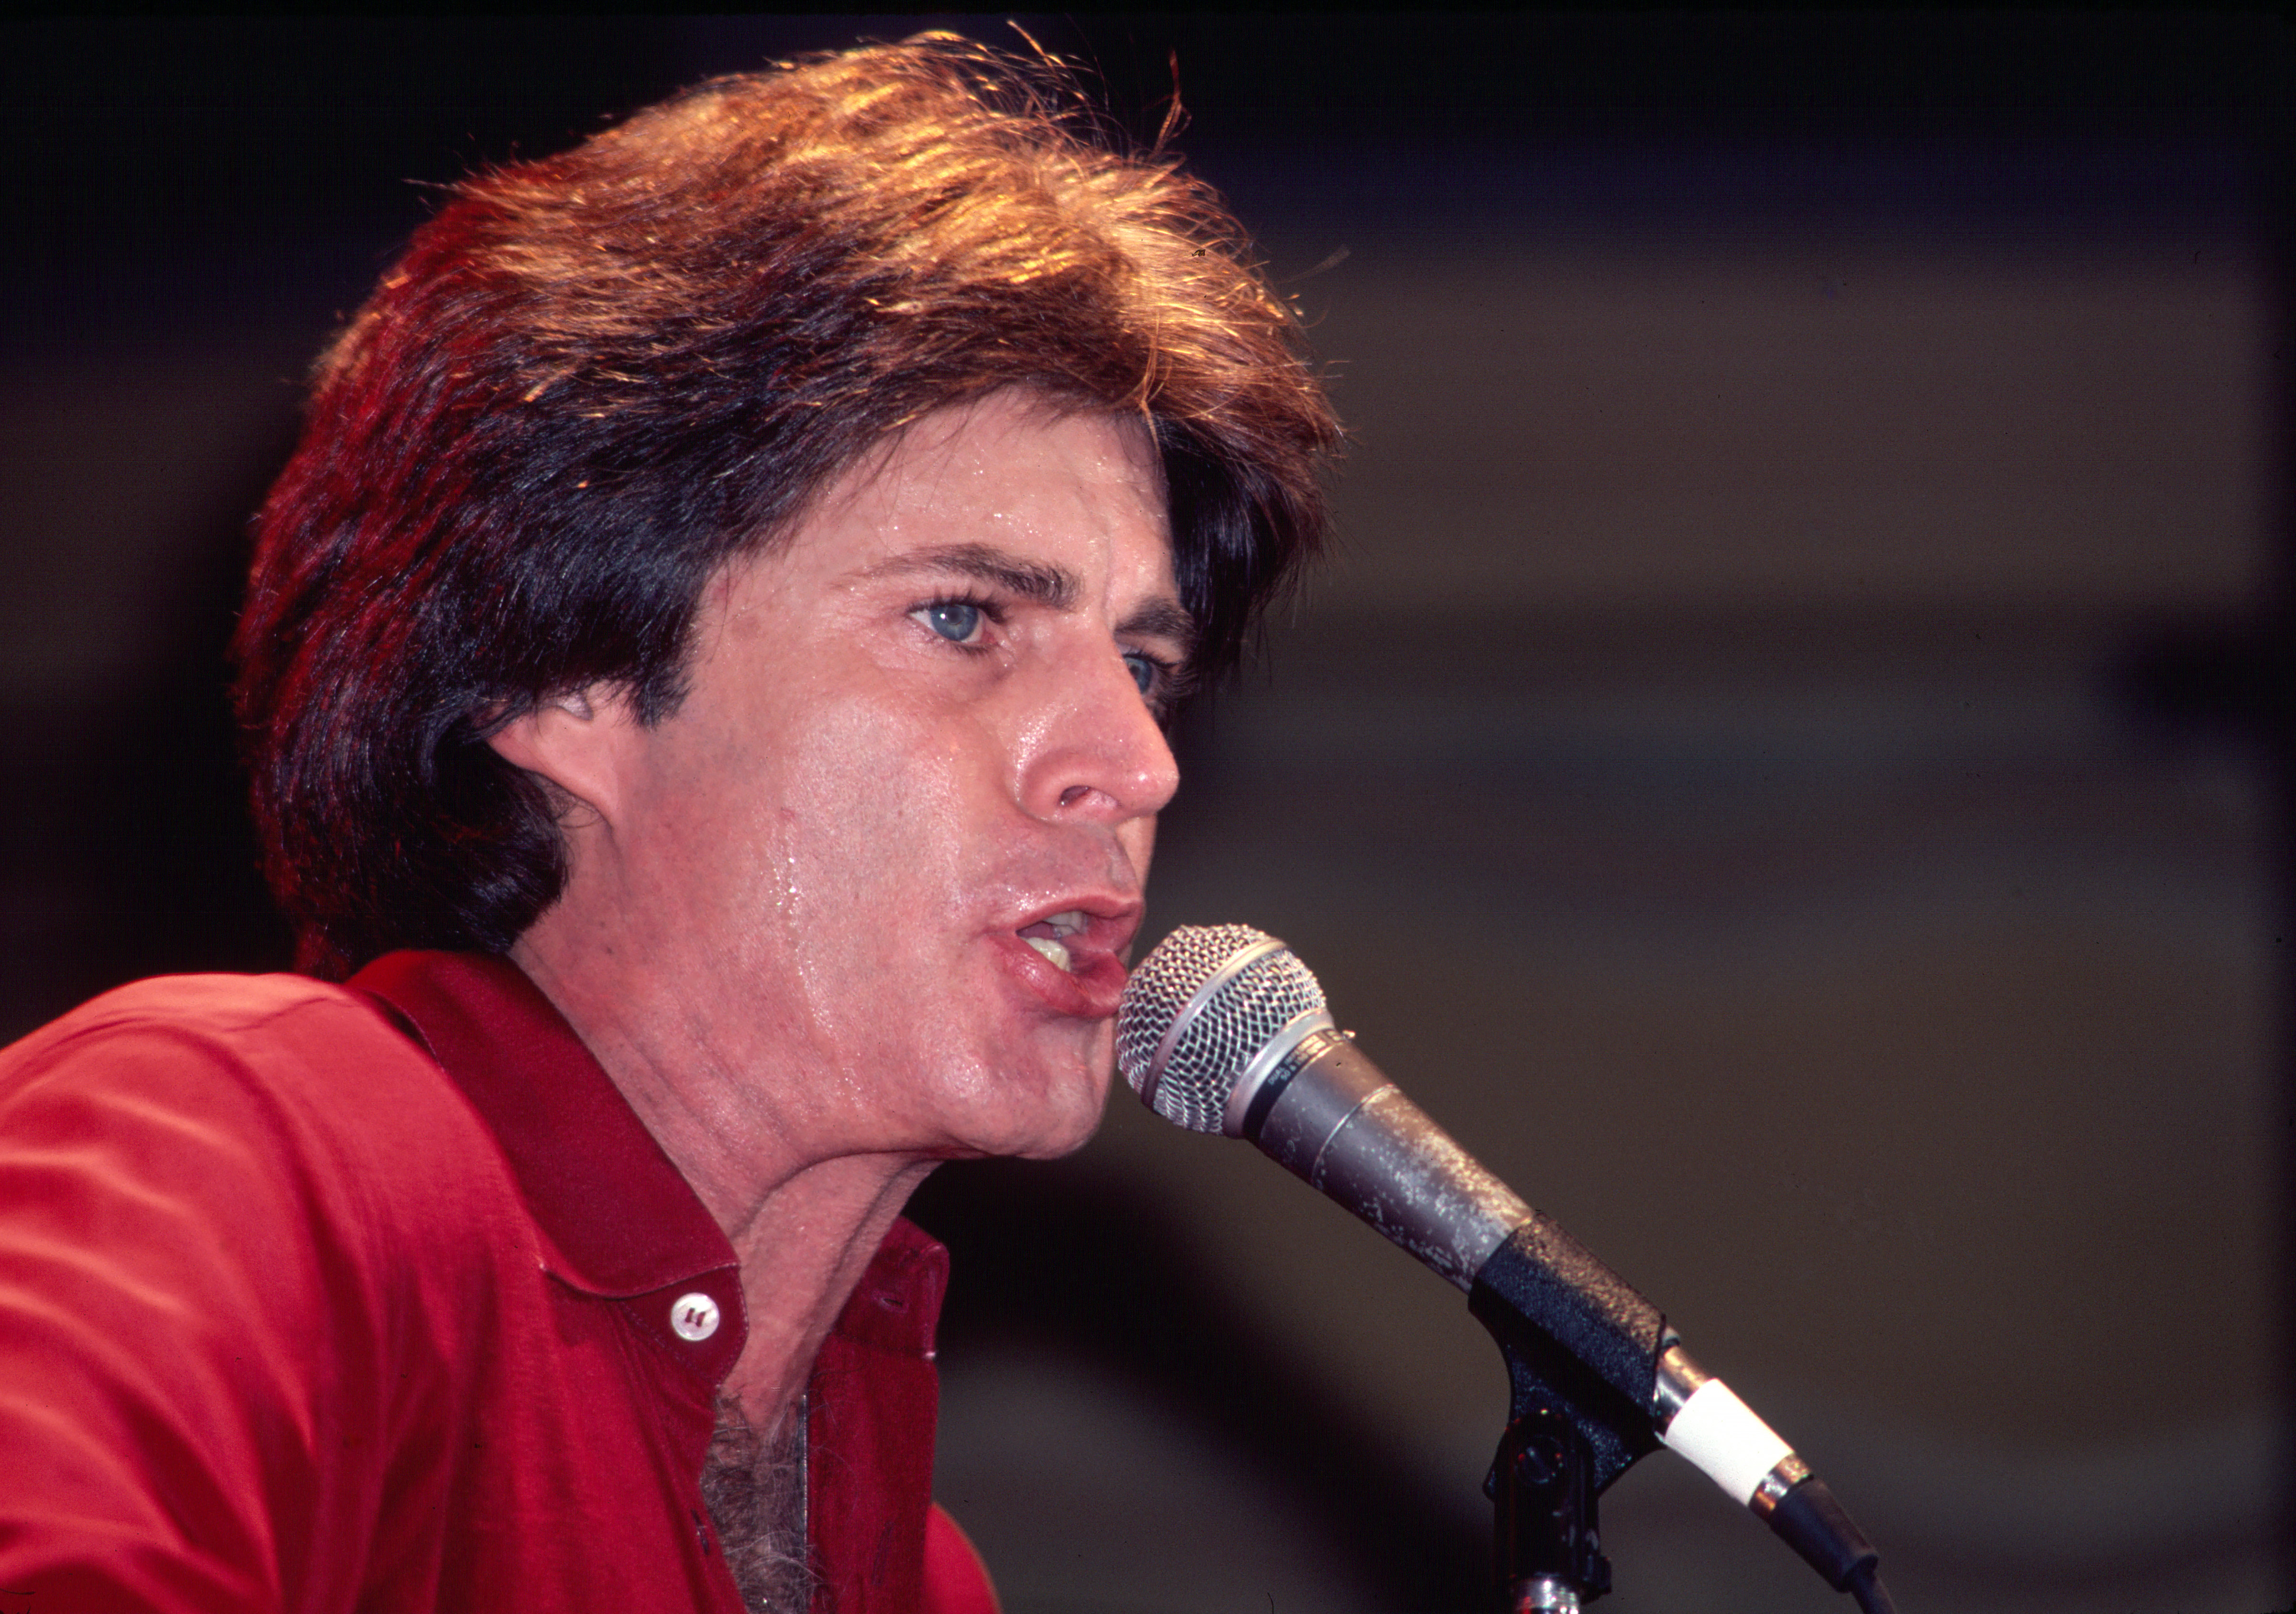 Ricky Nelson performs onstage at the Ritz in New York, on February 24, 1981 | Source: Getty Images